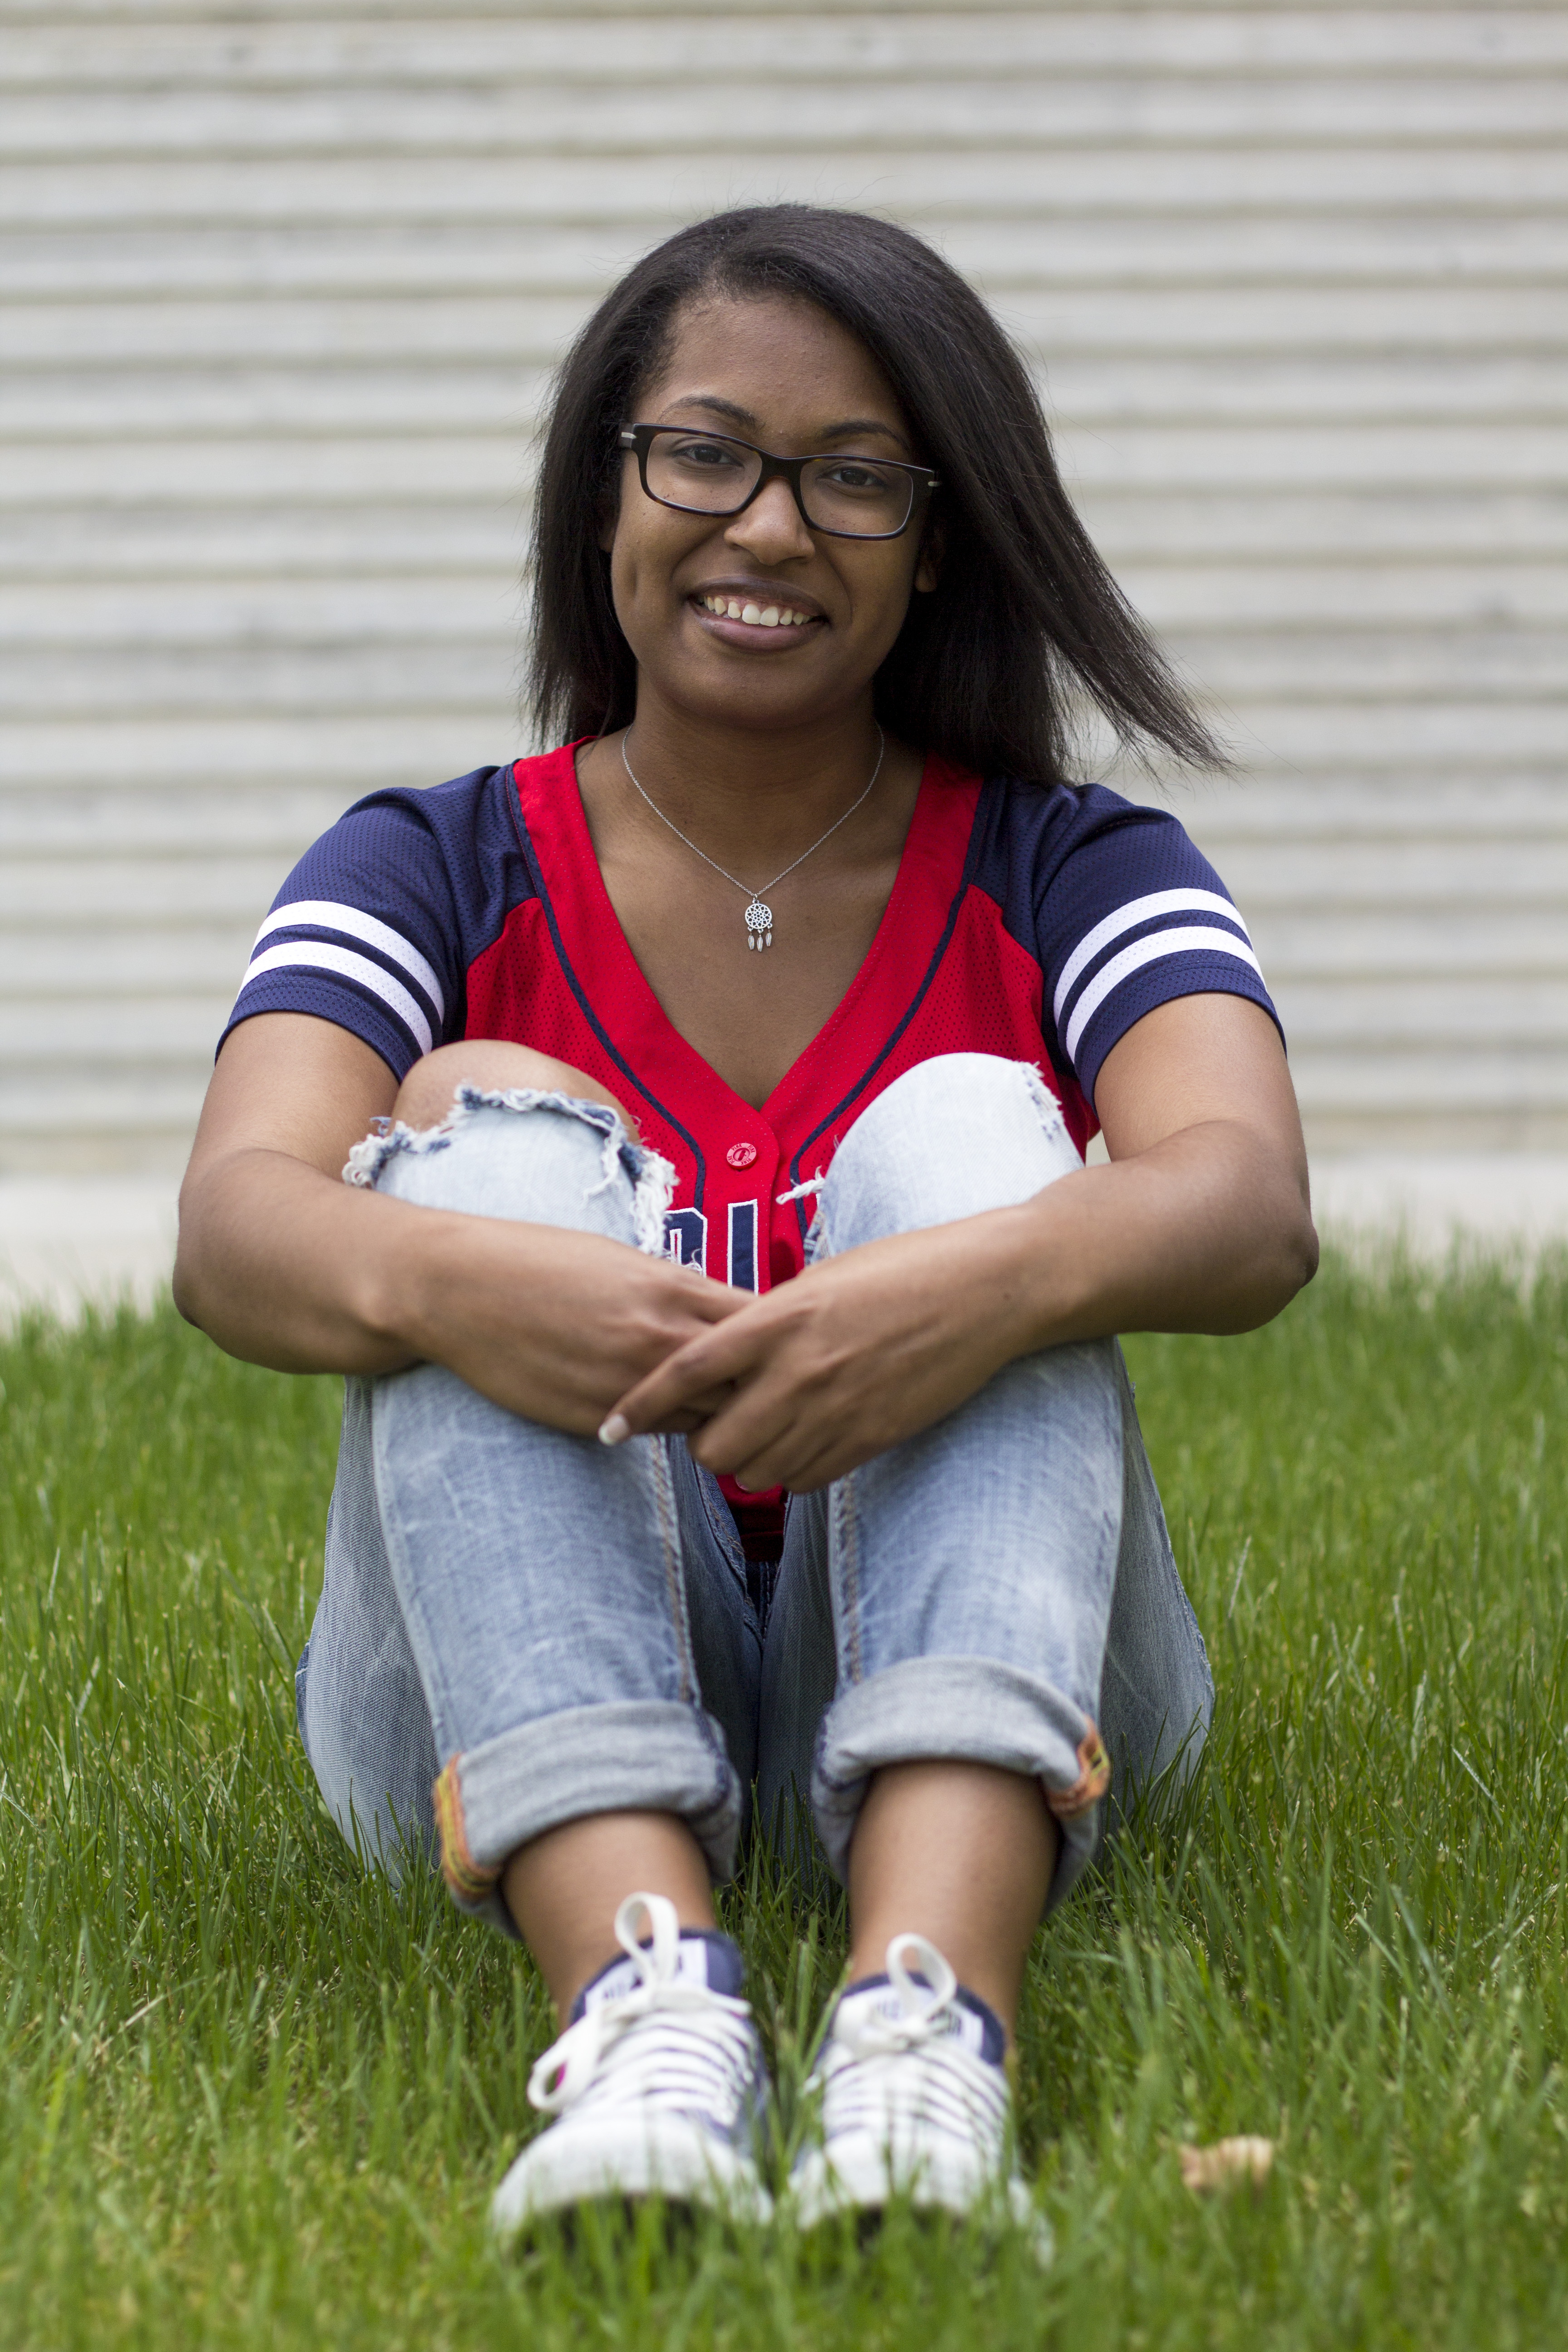 Tonei Perry studies accounting at UMKC and she's a Storytelling student